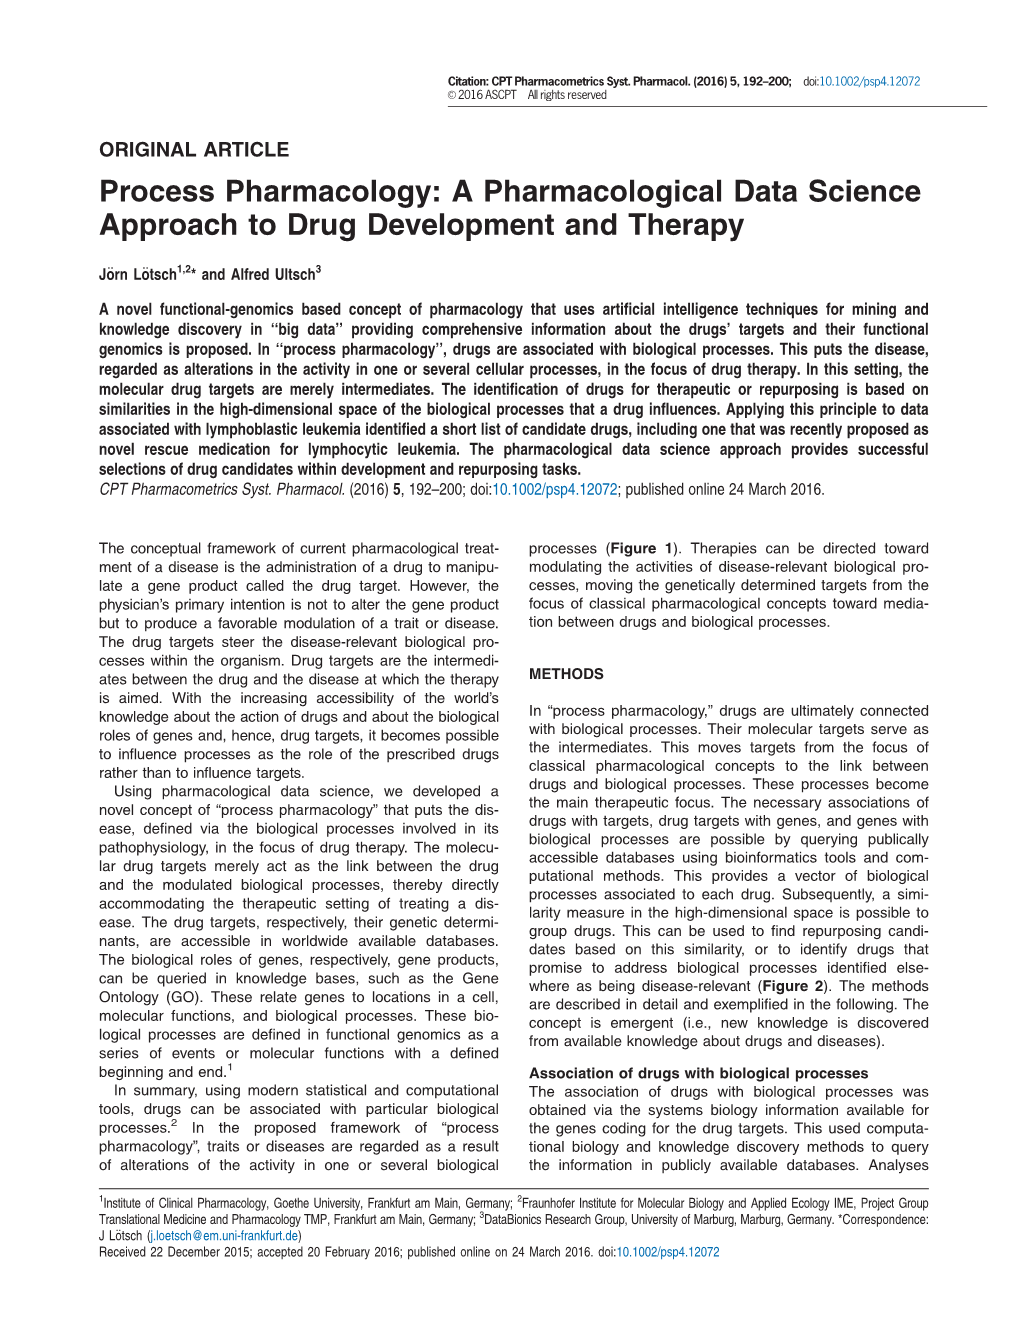 Process Pharmacology: a Pharmacological Data Science Approach to Drug Development and Therapy